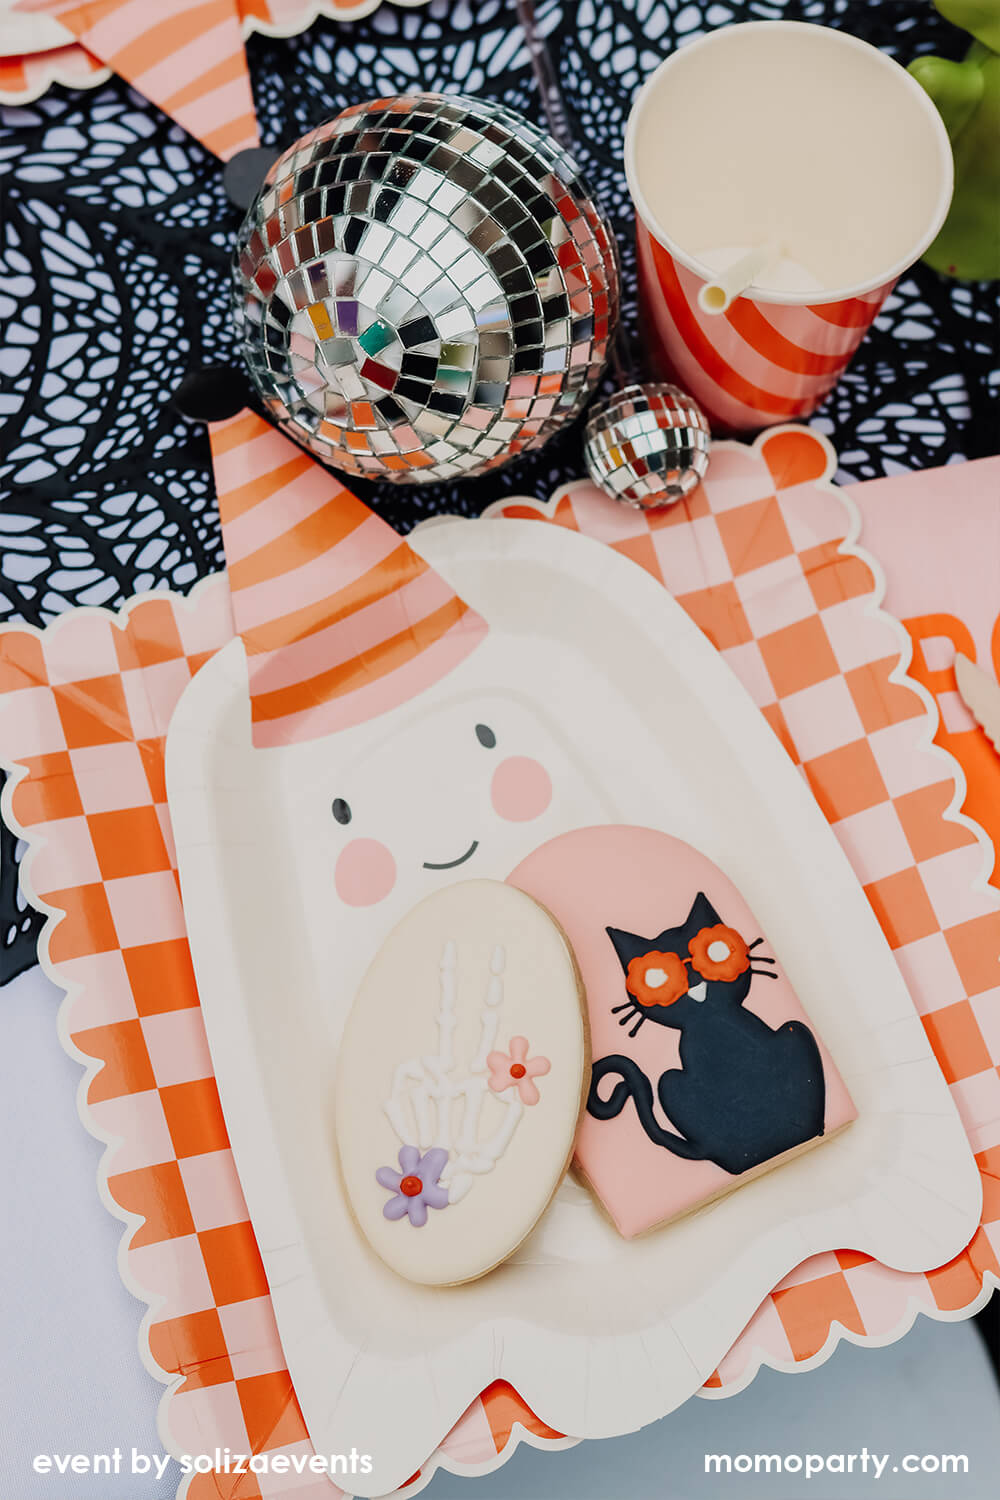 Details of Momo Party Groovy Halloween Themed Party Table, featuring a cookie with black cat and skeleton hand design on the My Mind's Eye Ghoul Gang Ghost Shaped Paper Plates, laid over Ghoul Gang Checkered Paper Plates, Iridescent Party Straws inside the Meri Meri Pink & Orange Stripy Cups, Shining Disco balls, They all on the black spider web placemats. This is such a modern fun Halloween theme and Halloween party for kids.